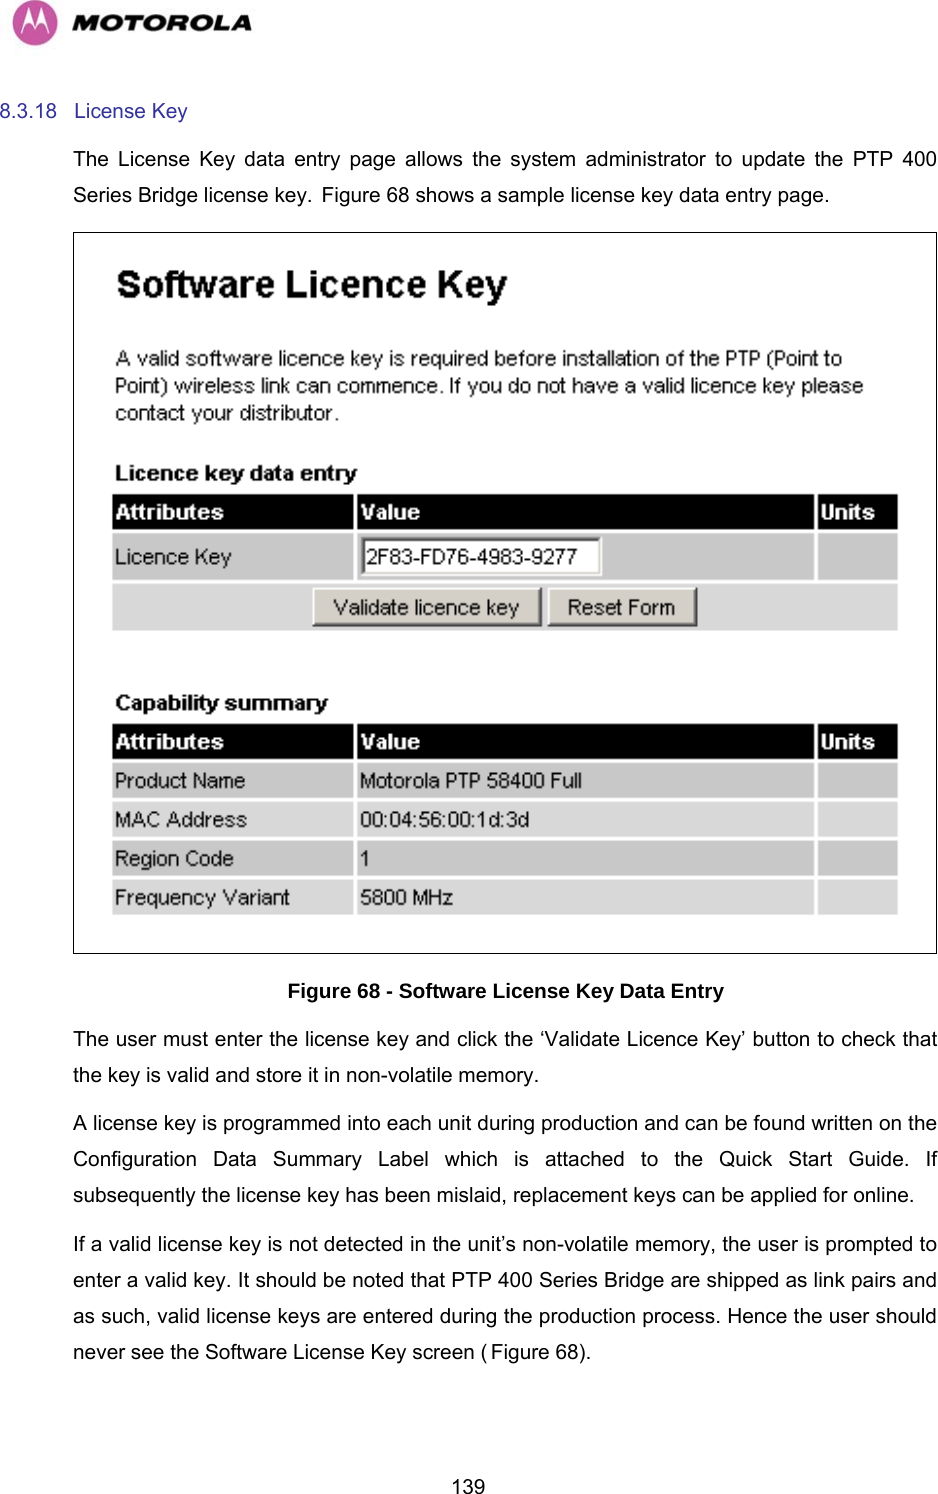   1398.3.18 License Key The License Key data entry page allows the system administrator to update the PTP 400 Series Bridge license key. HFigure 68 shows a sample license key data entry page.  Figure 68 - Software License Key Data Entry The user must enter the license key and click the ‘Validate Licence Key’ button to check that the key is valid and store it in non-volatile memory. A license key is programmed into each unit during production and can be found written on the Configuration Data Summary Label which is attached to the Quick Start Guide. If subsequently the license key has been mislaid, replacement keys can be applied for online. If a valid license key is not detected in the unit’s non-volatile memory, the user is prompted to enter a valid key. It should be noted that PTP 400 Series Bridge are shipped as link pairs and as such, valid license keys are entered during the production process. Hence the user should never see the Software License Key screen (HFigure 68). 